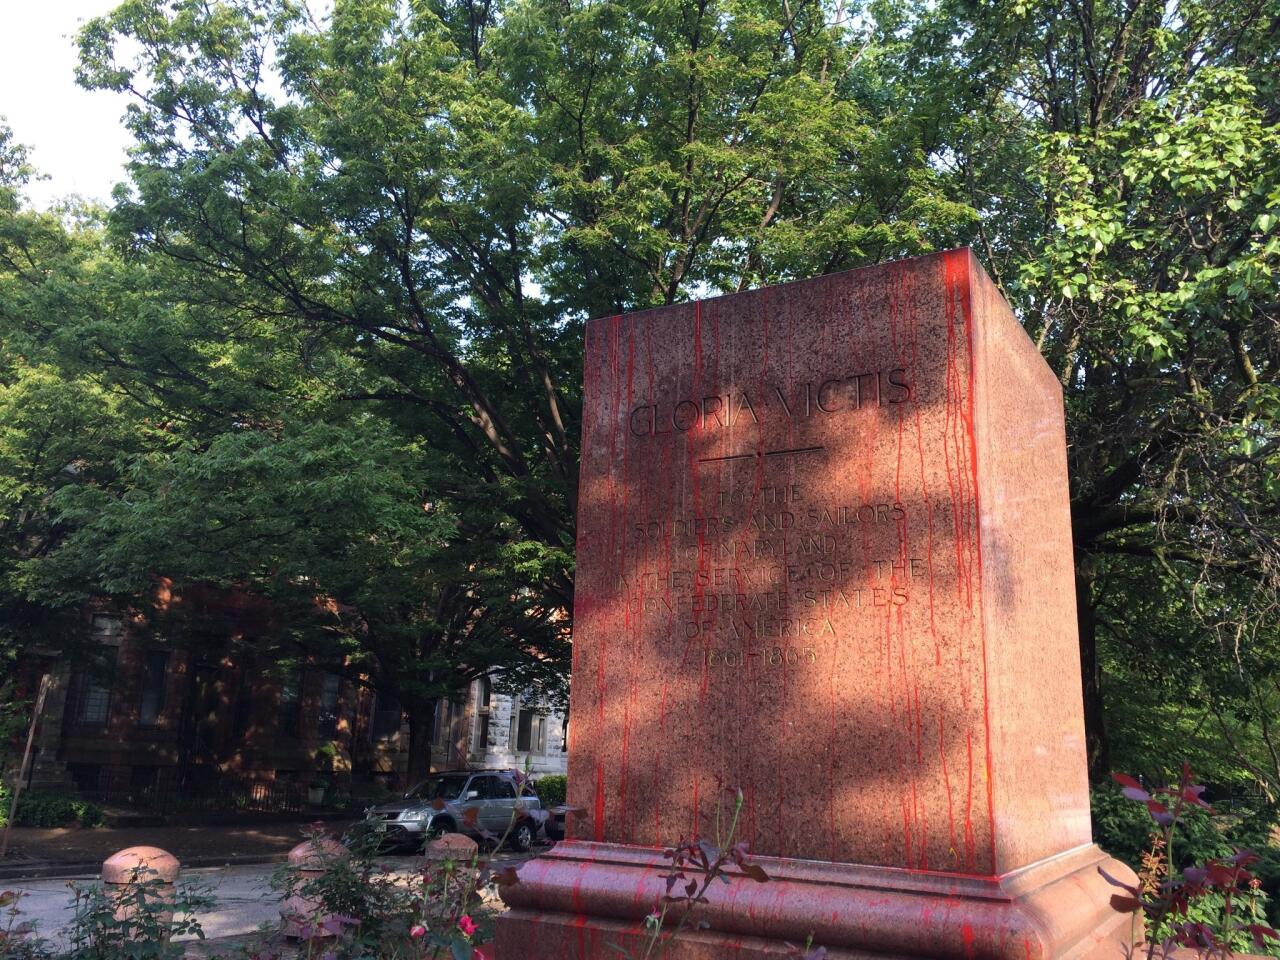 Monument removed